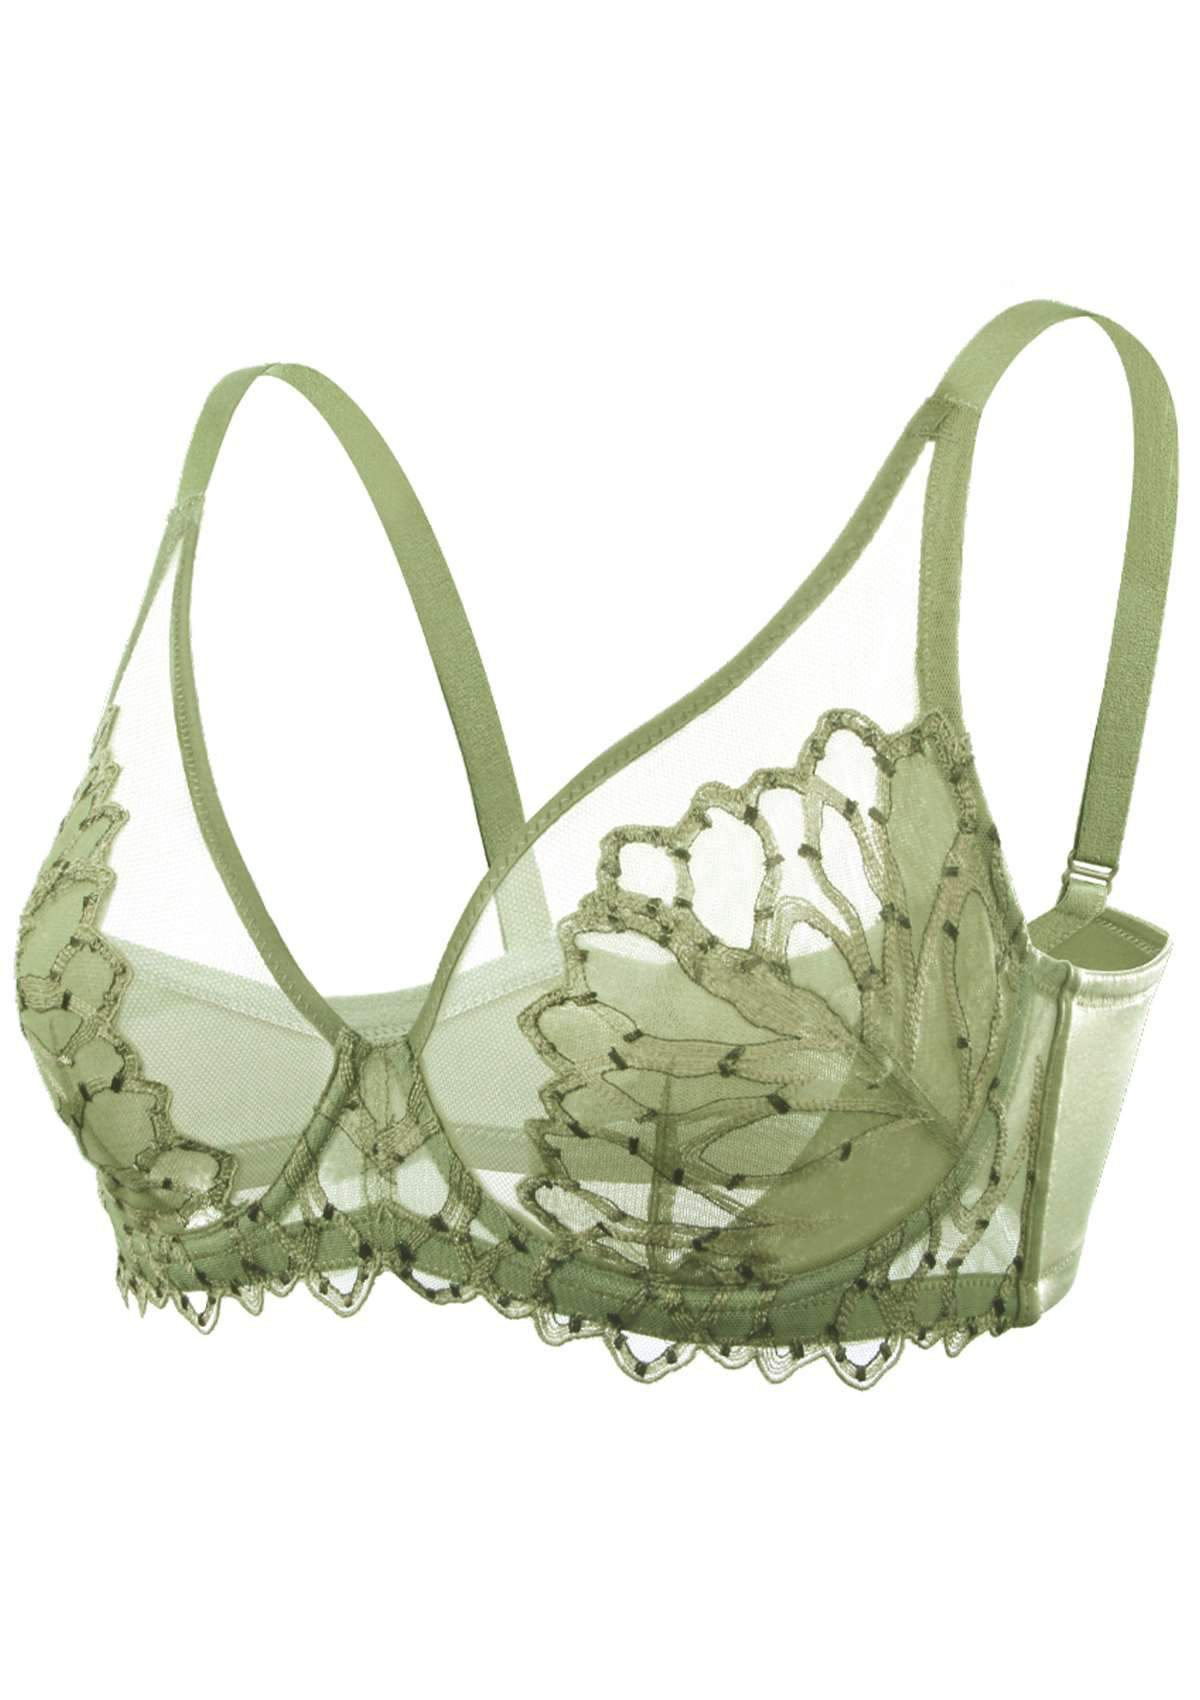 HSIA Chrysanthemum Floral Embroidered Bra: Lace Sheer Unpadded Bra - Green / 32 / C